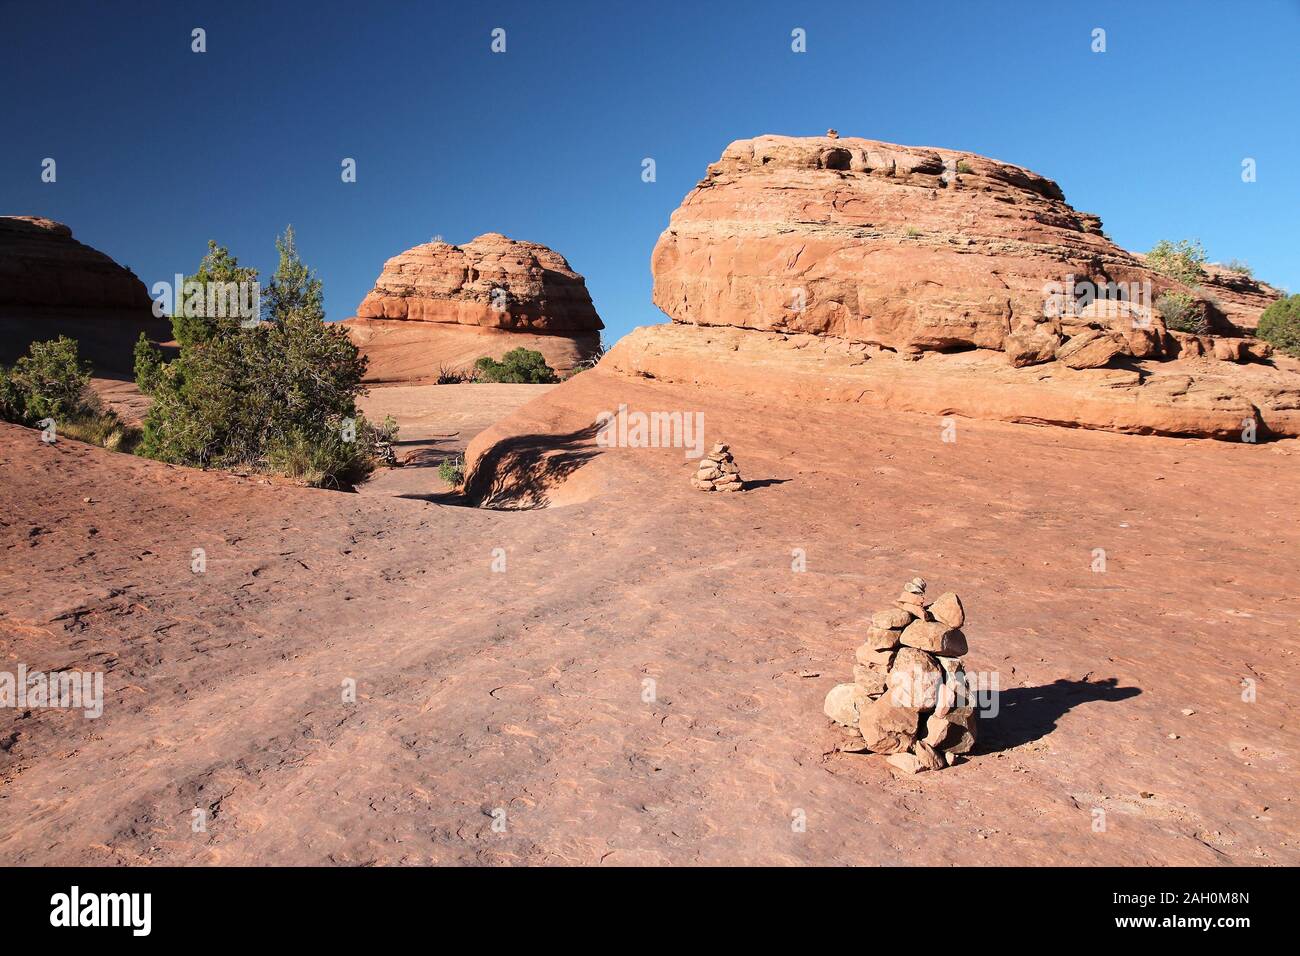 Hiking trail in Utah, United States. Cairns trail marking in Arches National Park. Stock Photo